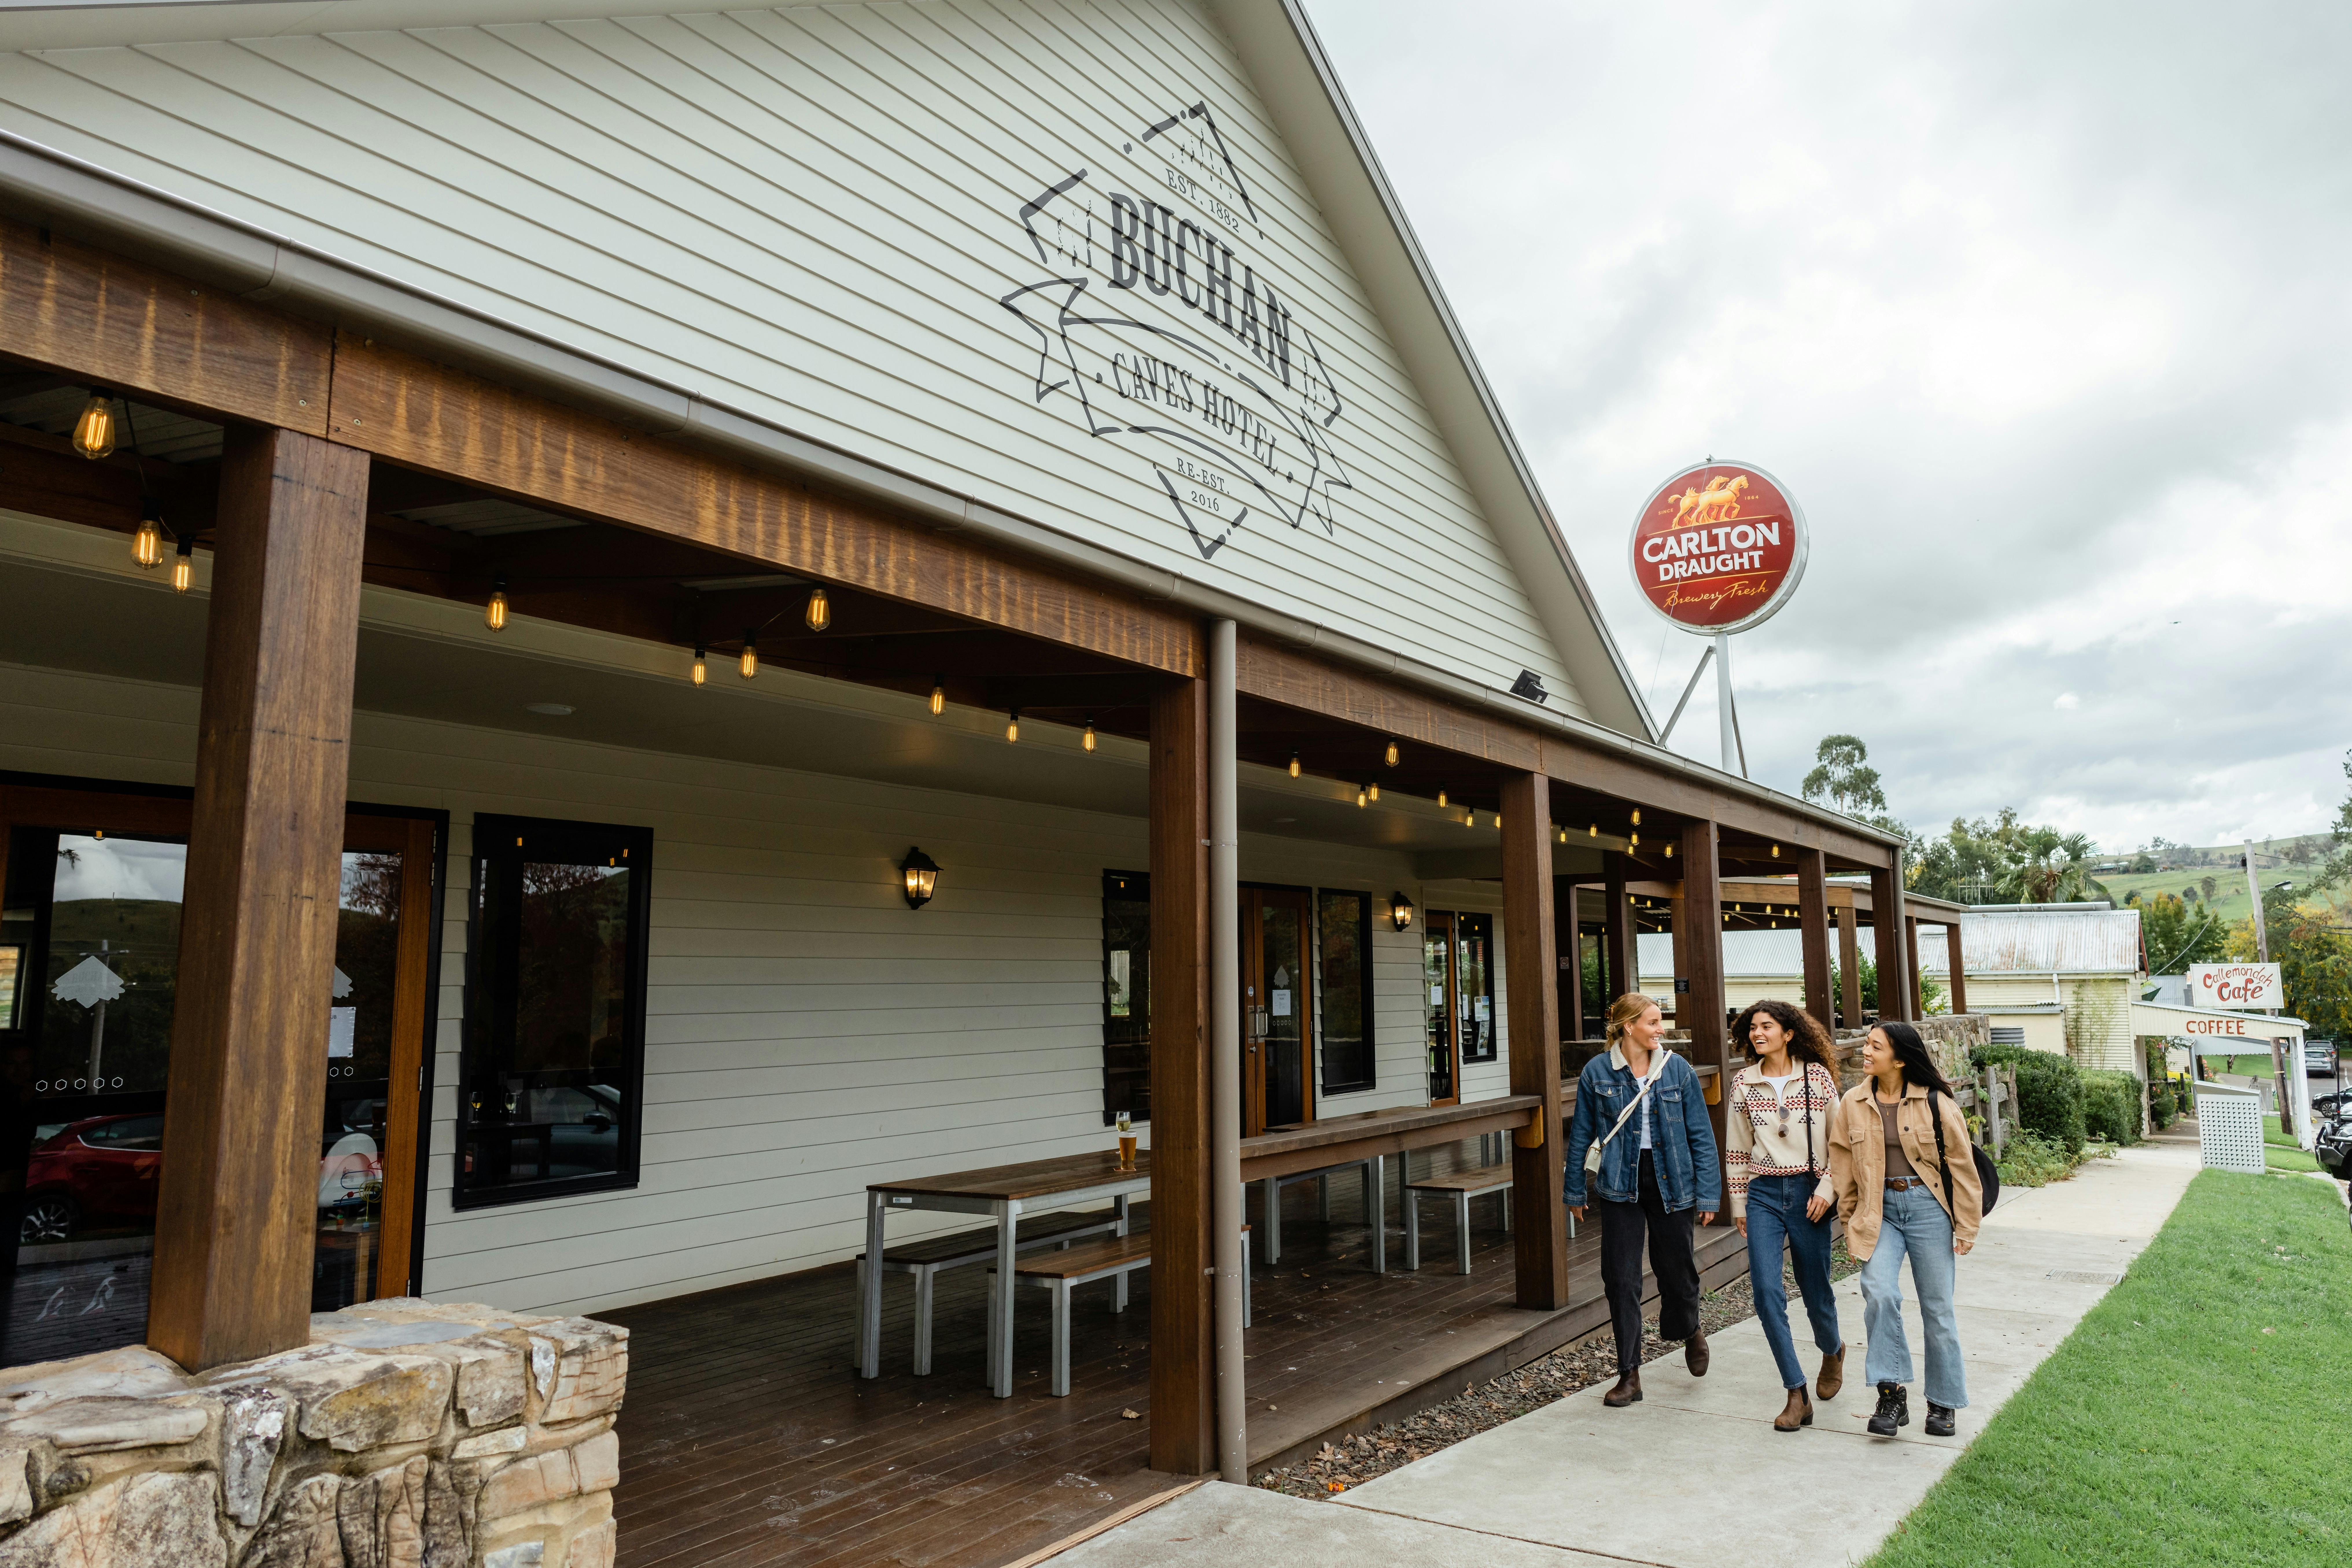 Three young women arrive at Buchan Pub, the Buchan Caves Hotel logo is featured above the awning